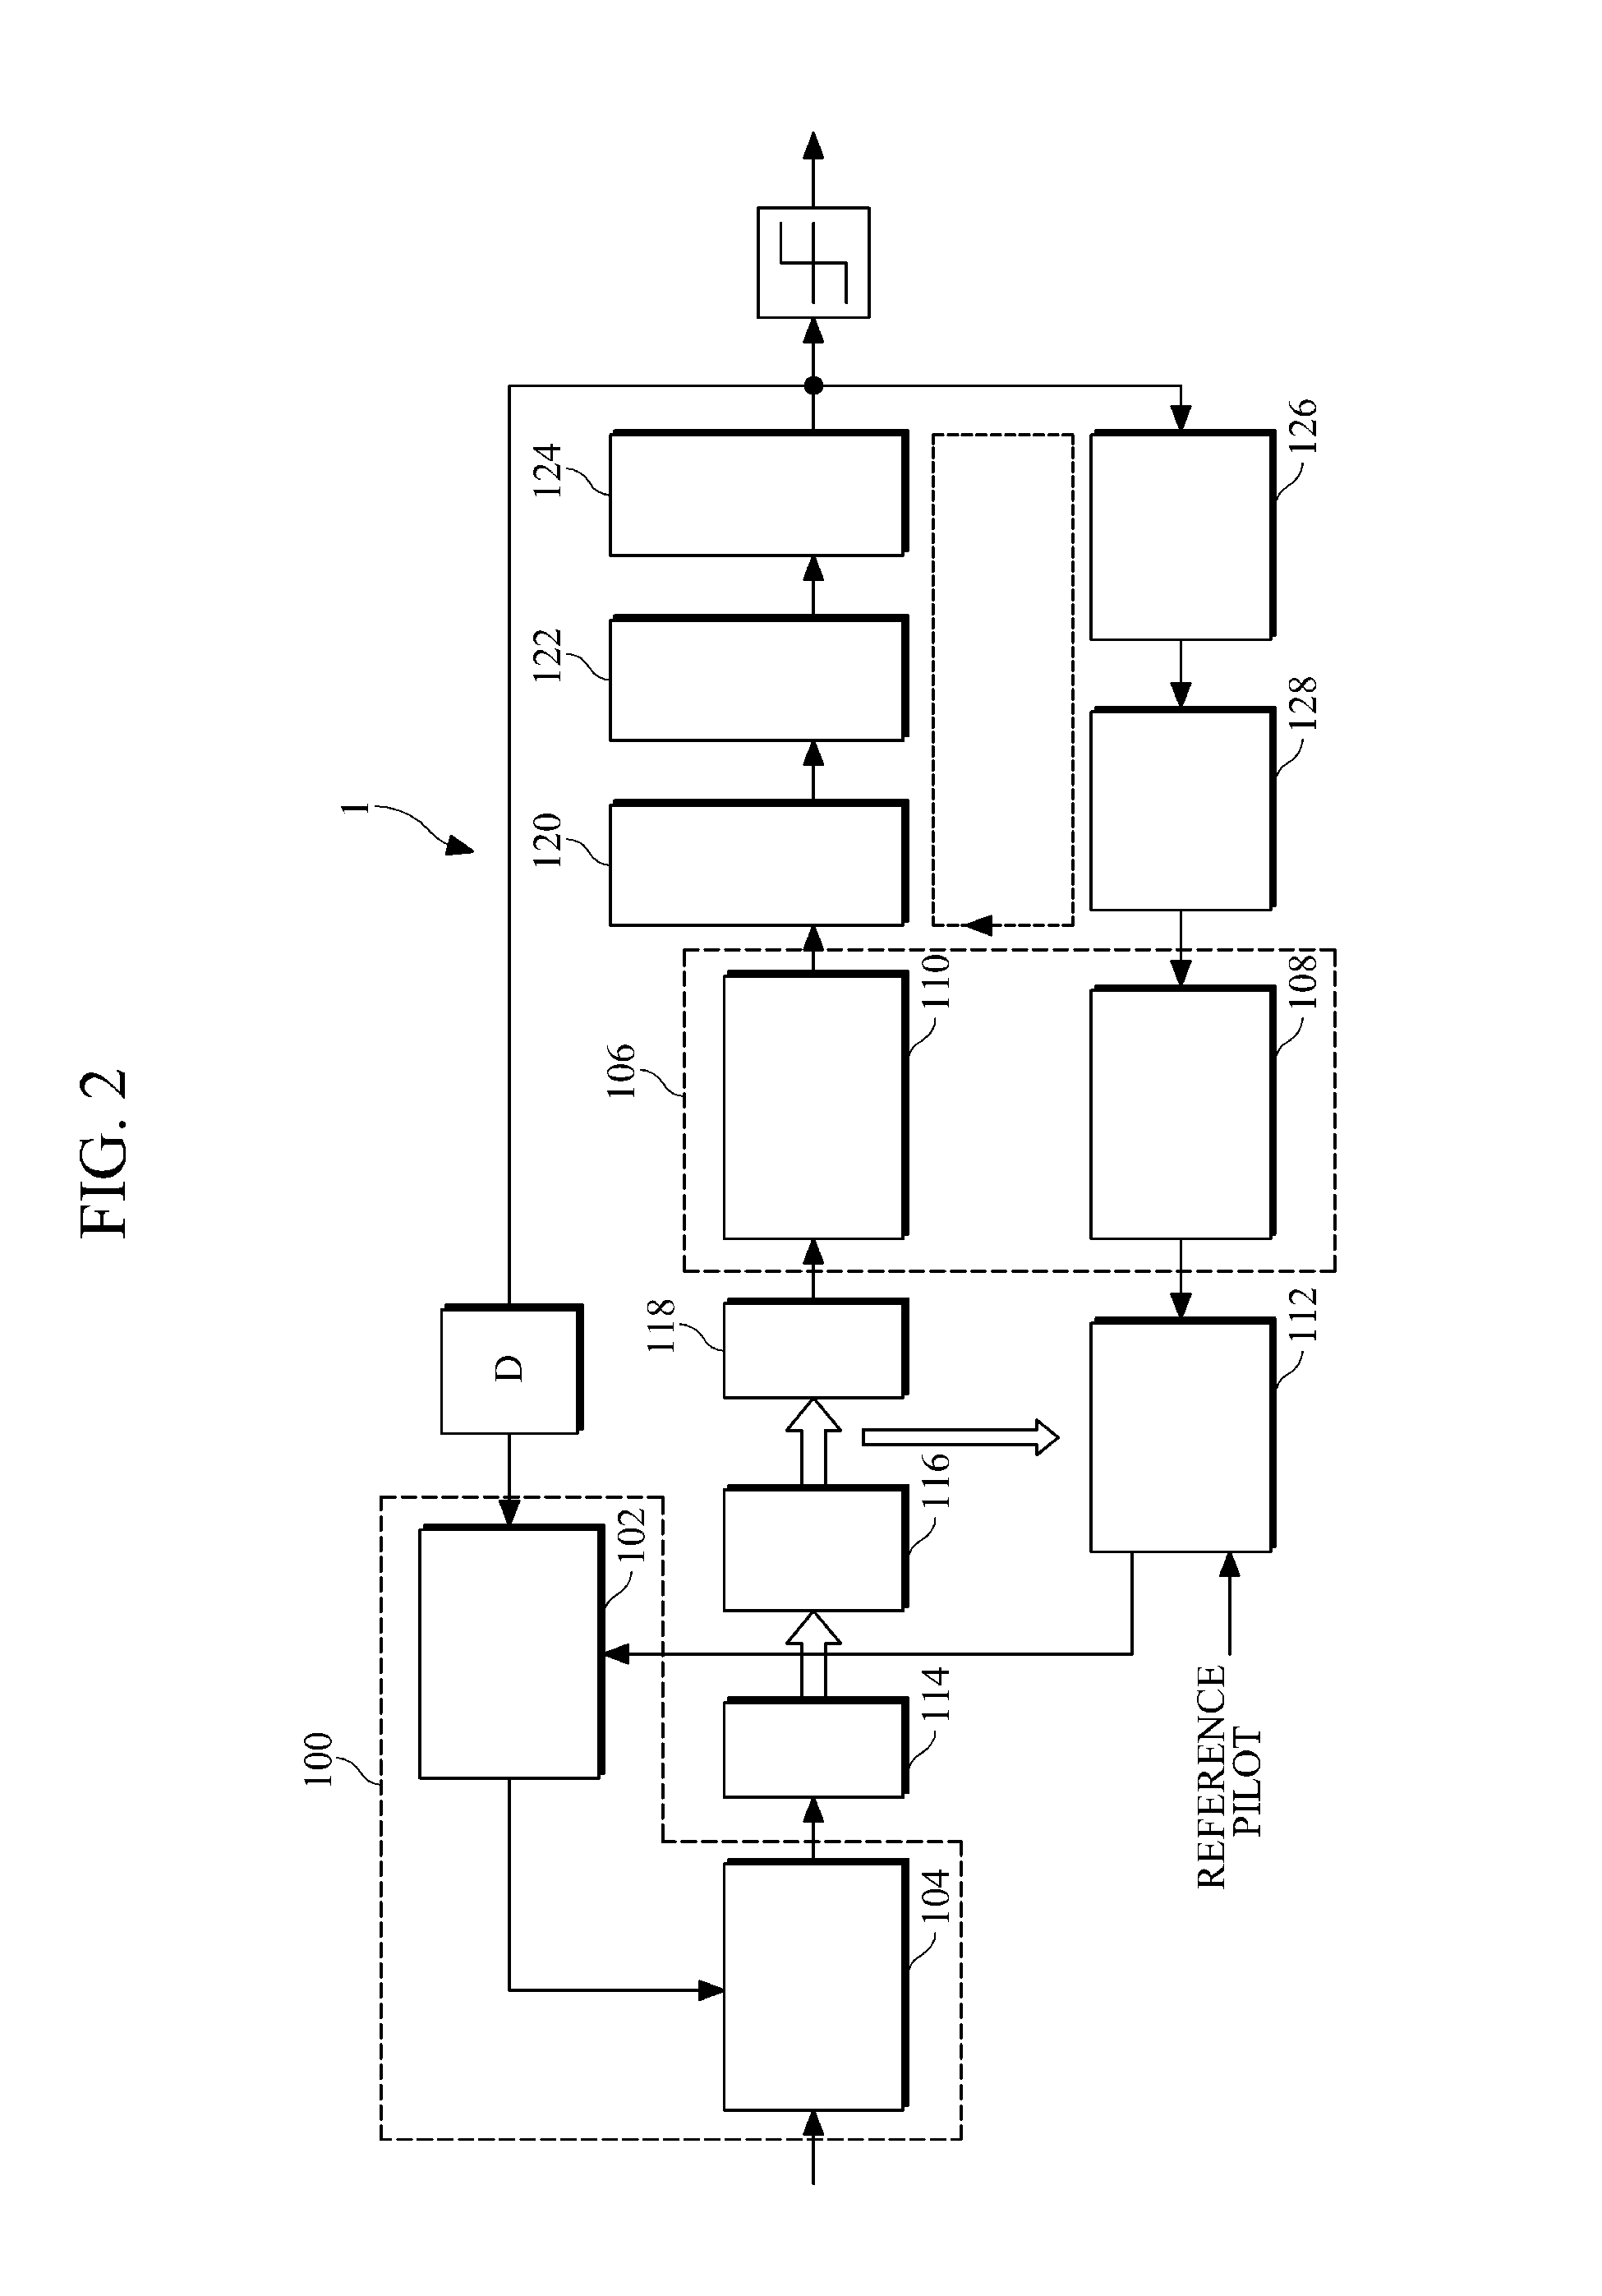 Apparatus for receiving signals in a communication system based on multicarrier transmission and method for interference cancellation